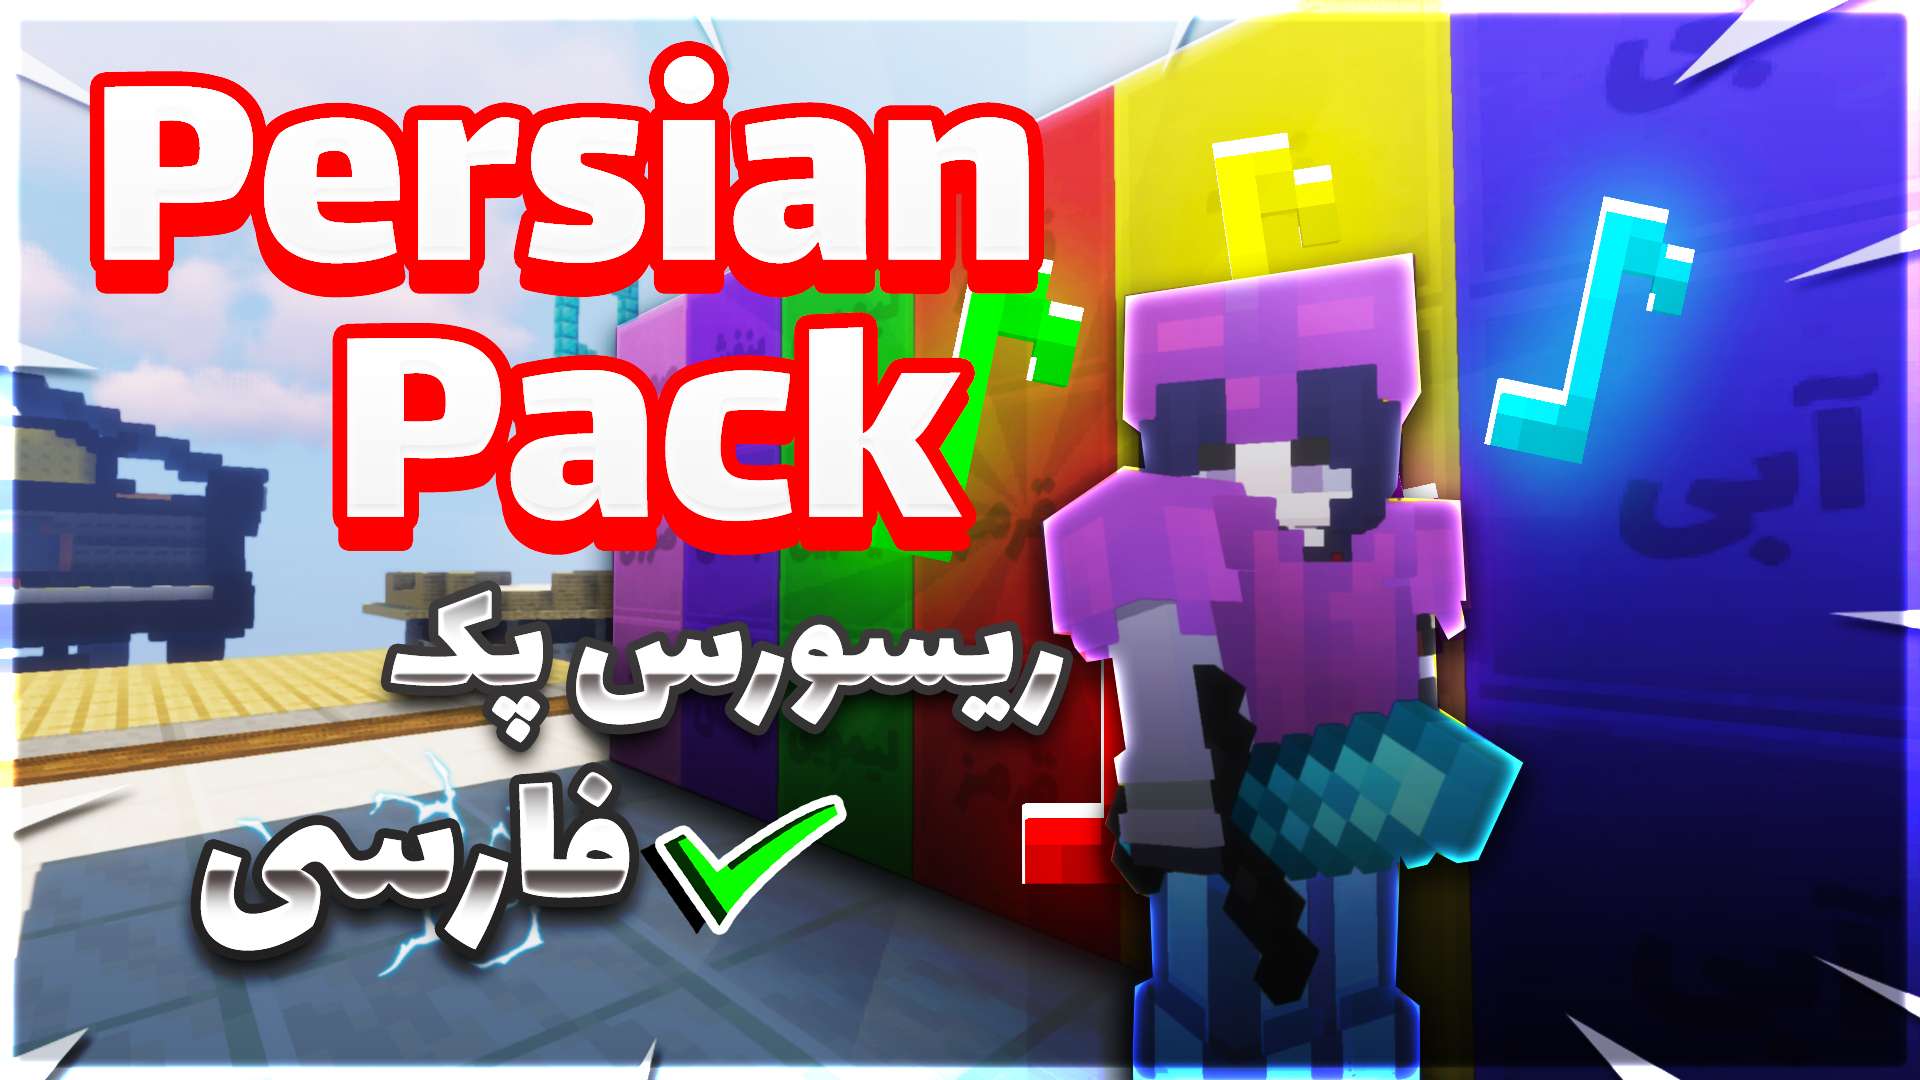 Decy 1k (Persian Pack) 16 by DeciSiv3 on PvPRP